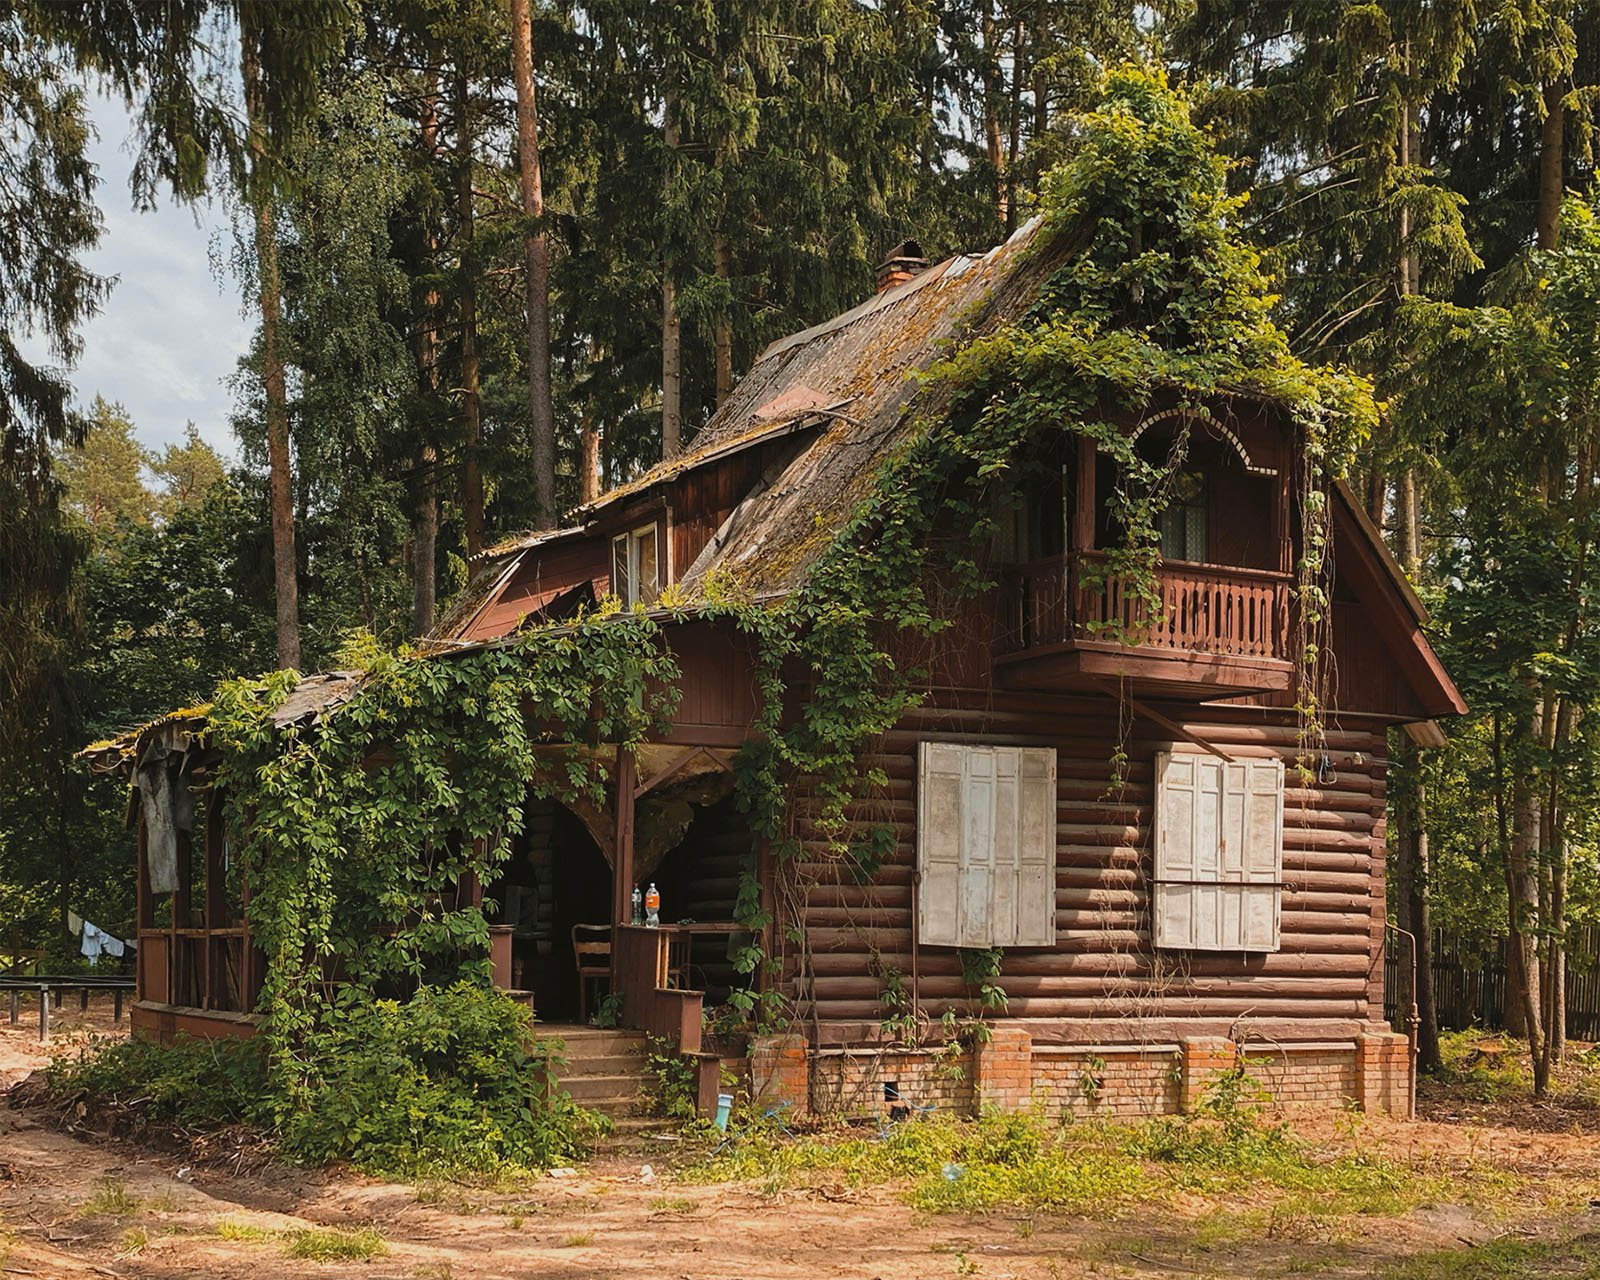 A dacha home with ivy growing along the side.